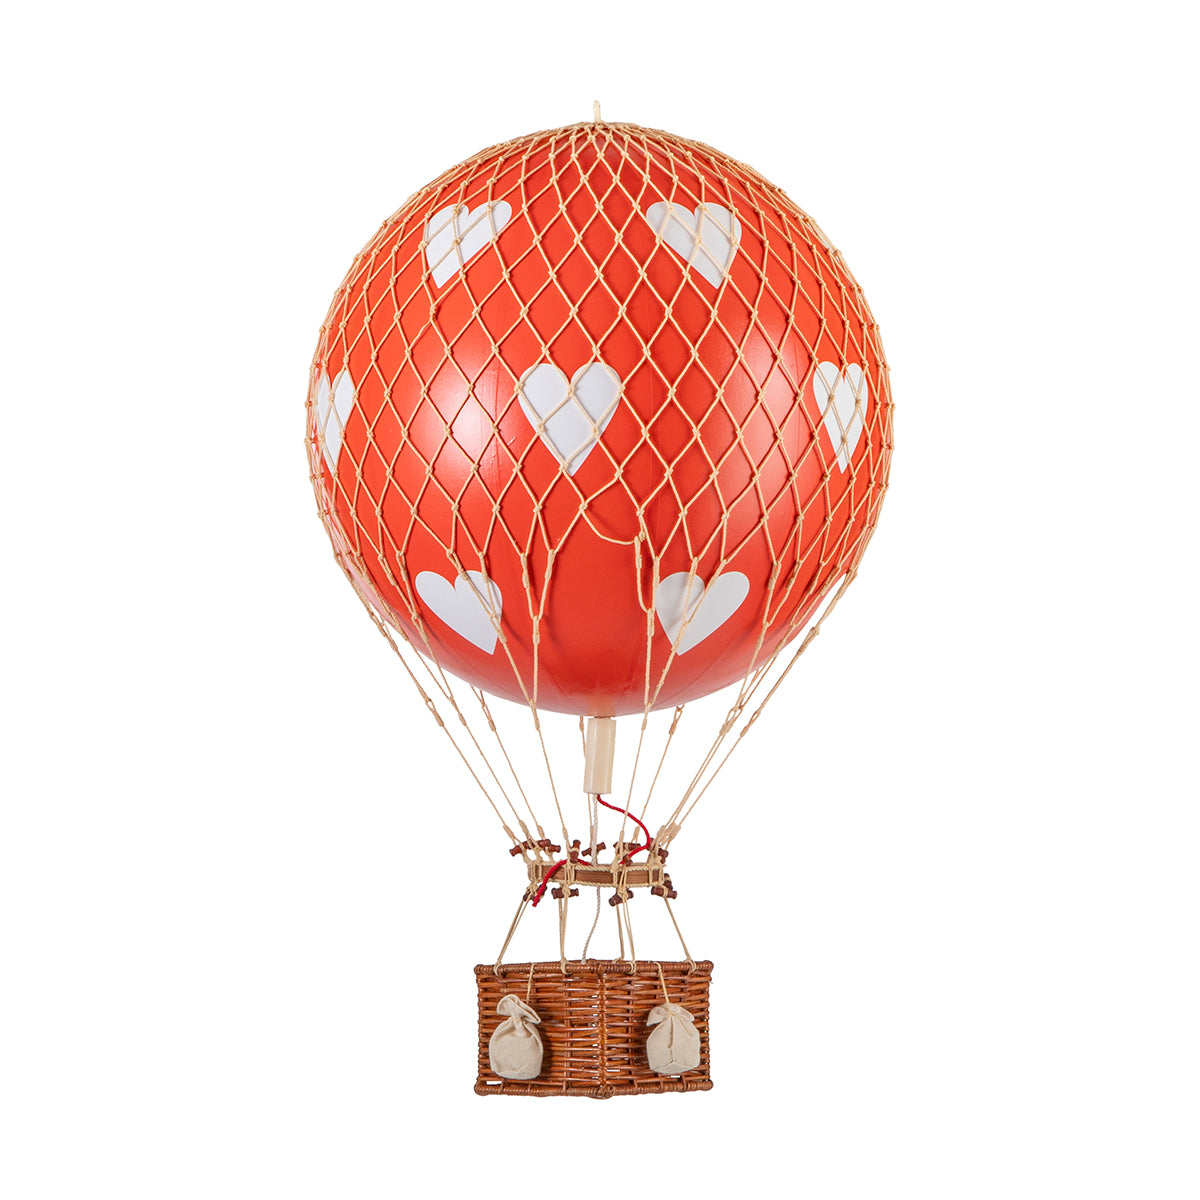 Experience the enchantment of a Wonderen Medium Hot Air Balloon - Royal Aero as it soars to new heights, offering a unique perspective adorned with charming heart motifs.